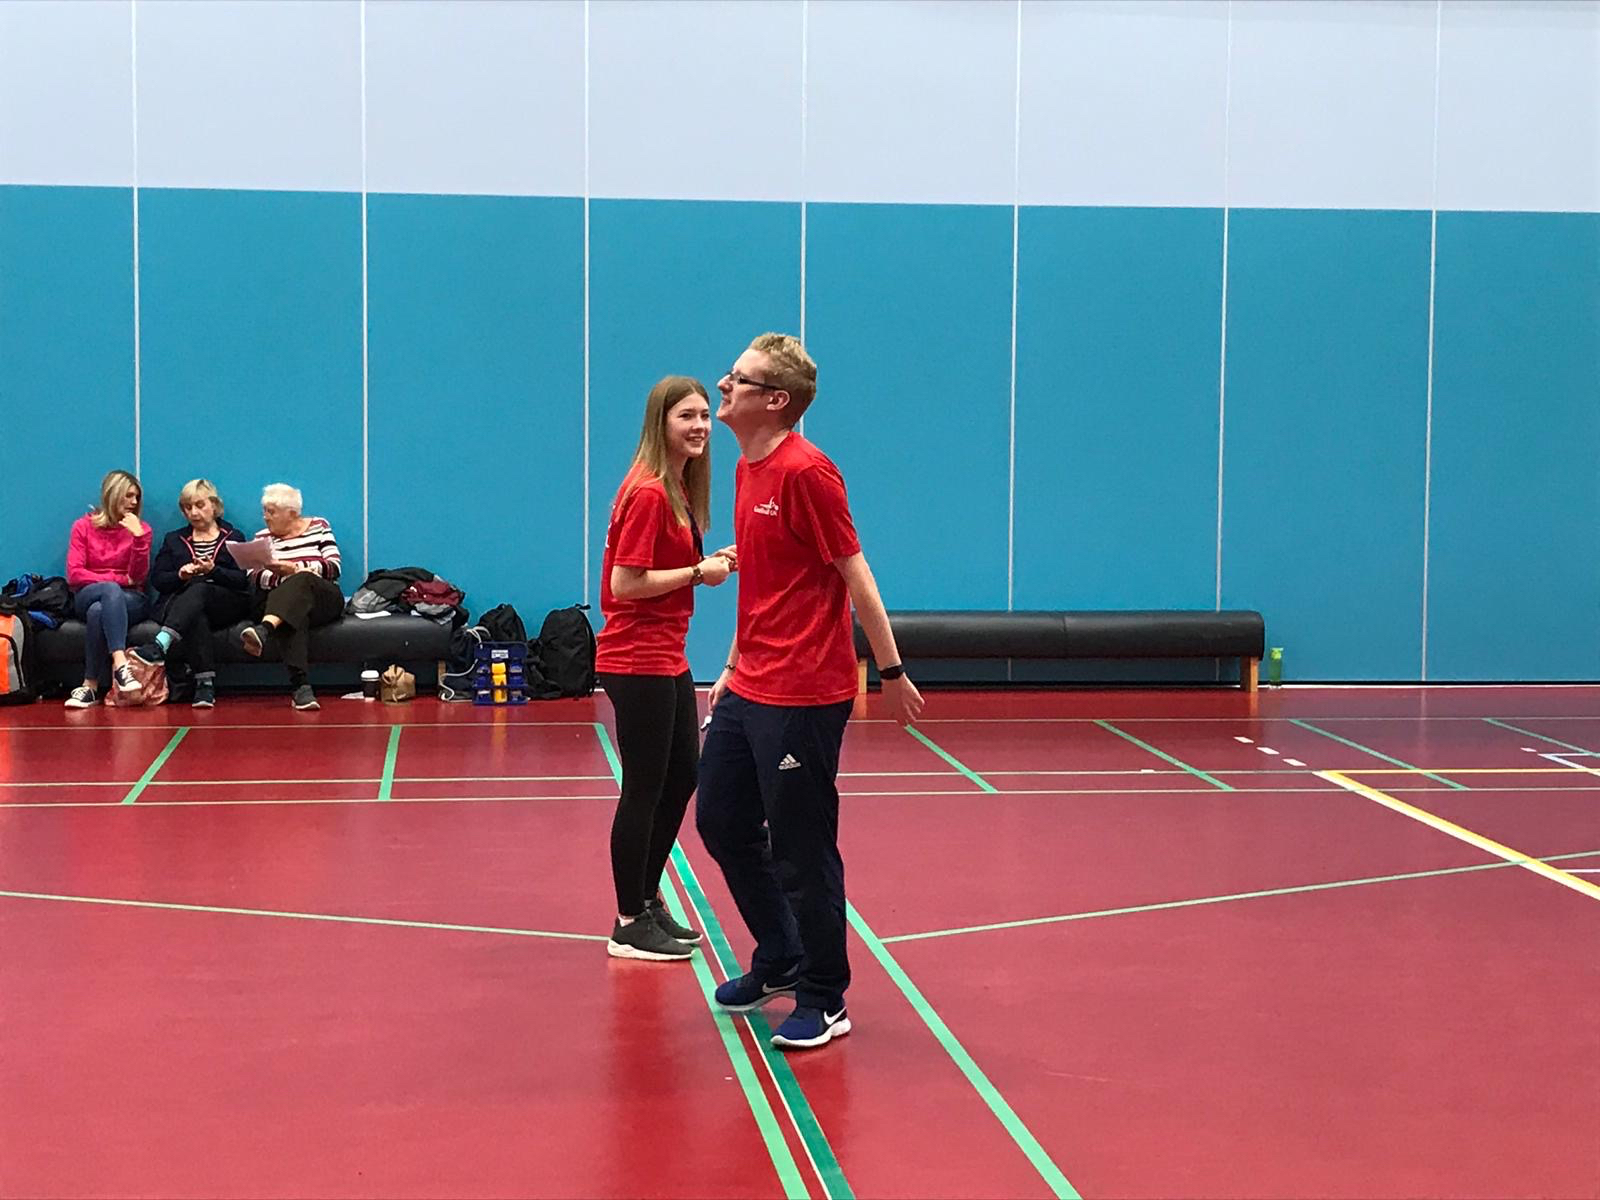 Stephen Newey and Imogen Winder officiating a goalball game.